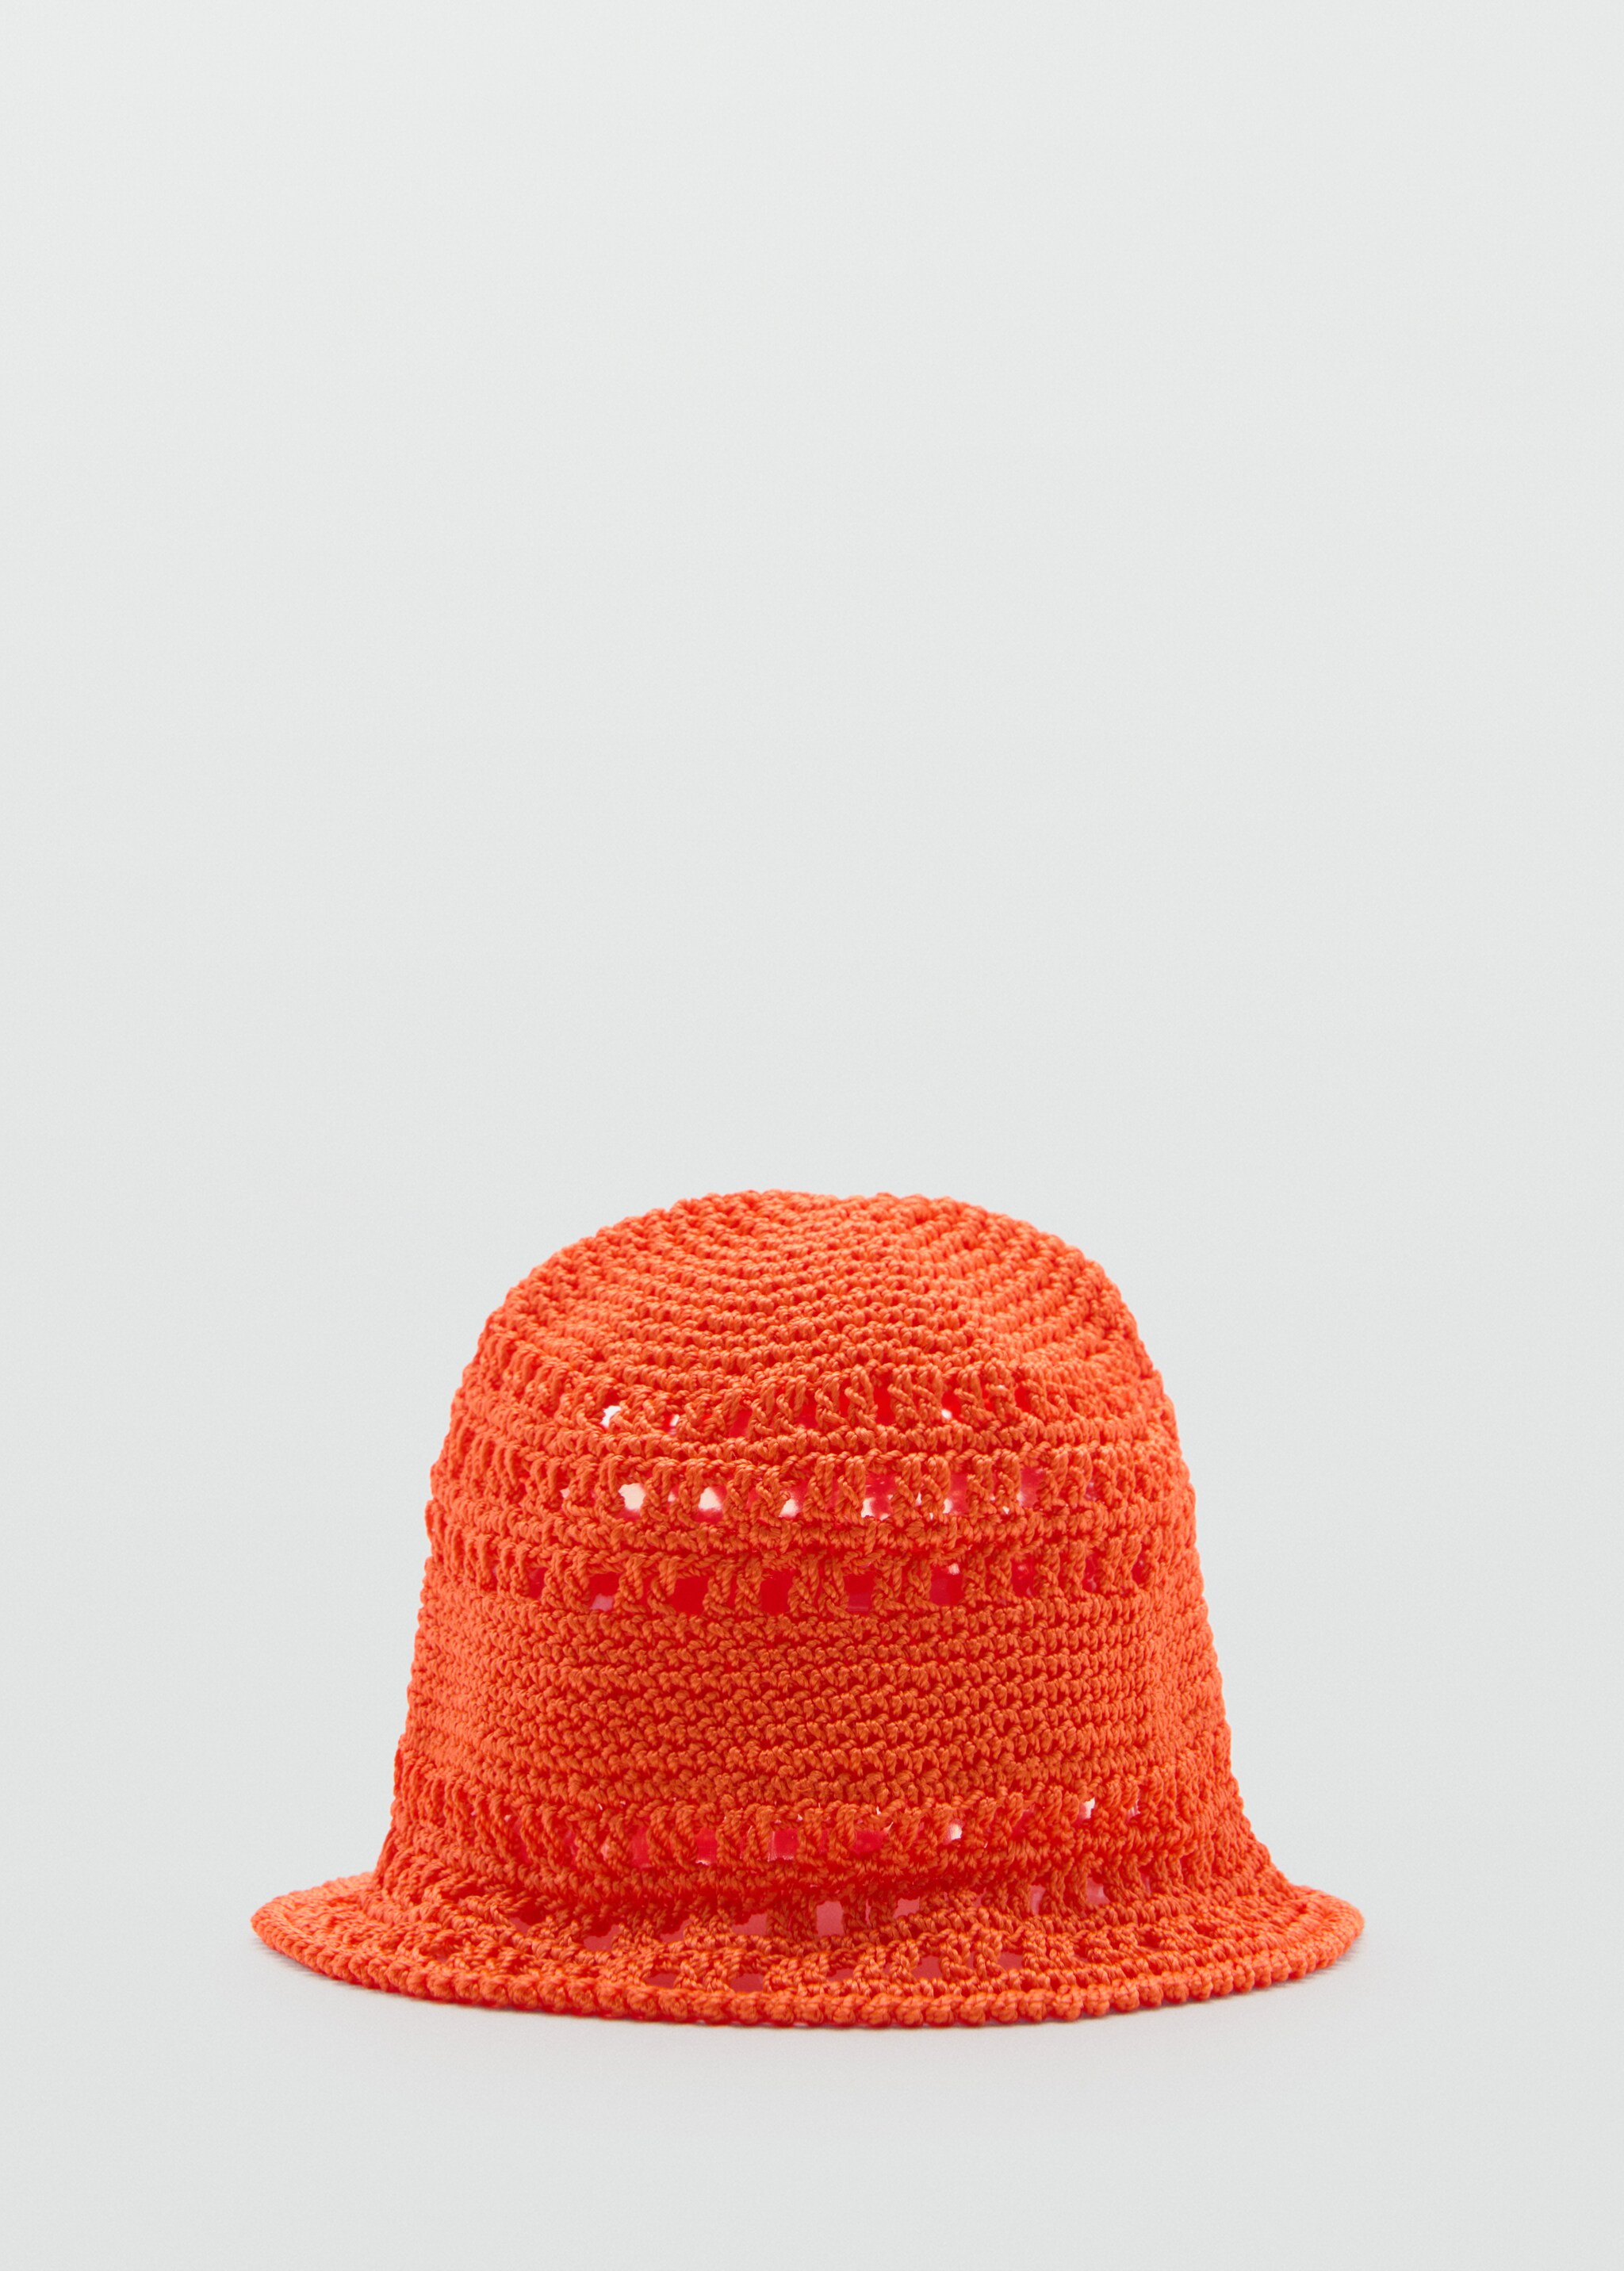 Crochet bucket hat - Article without model